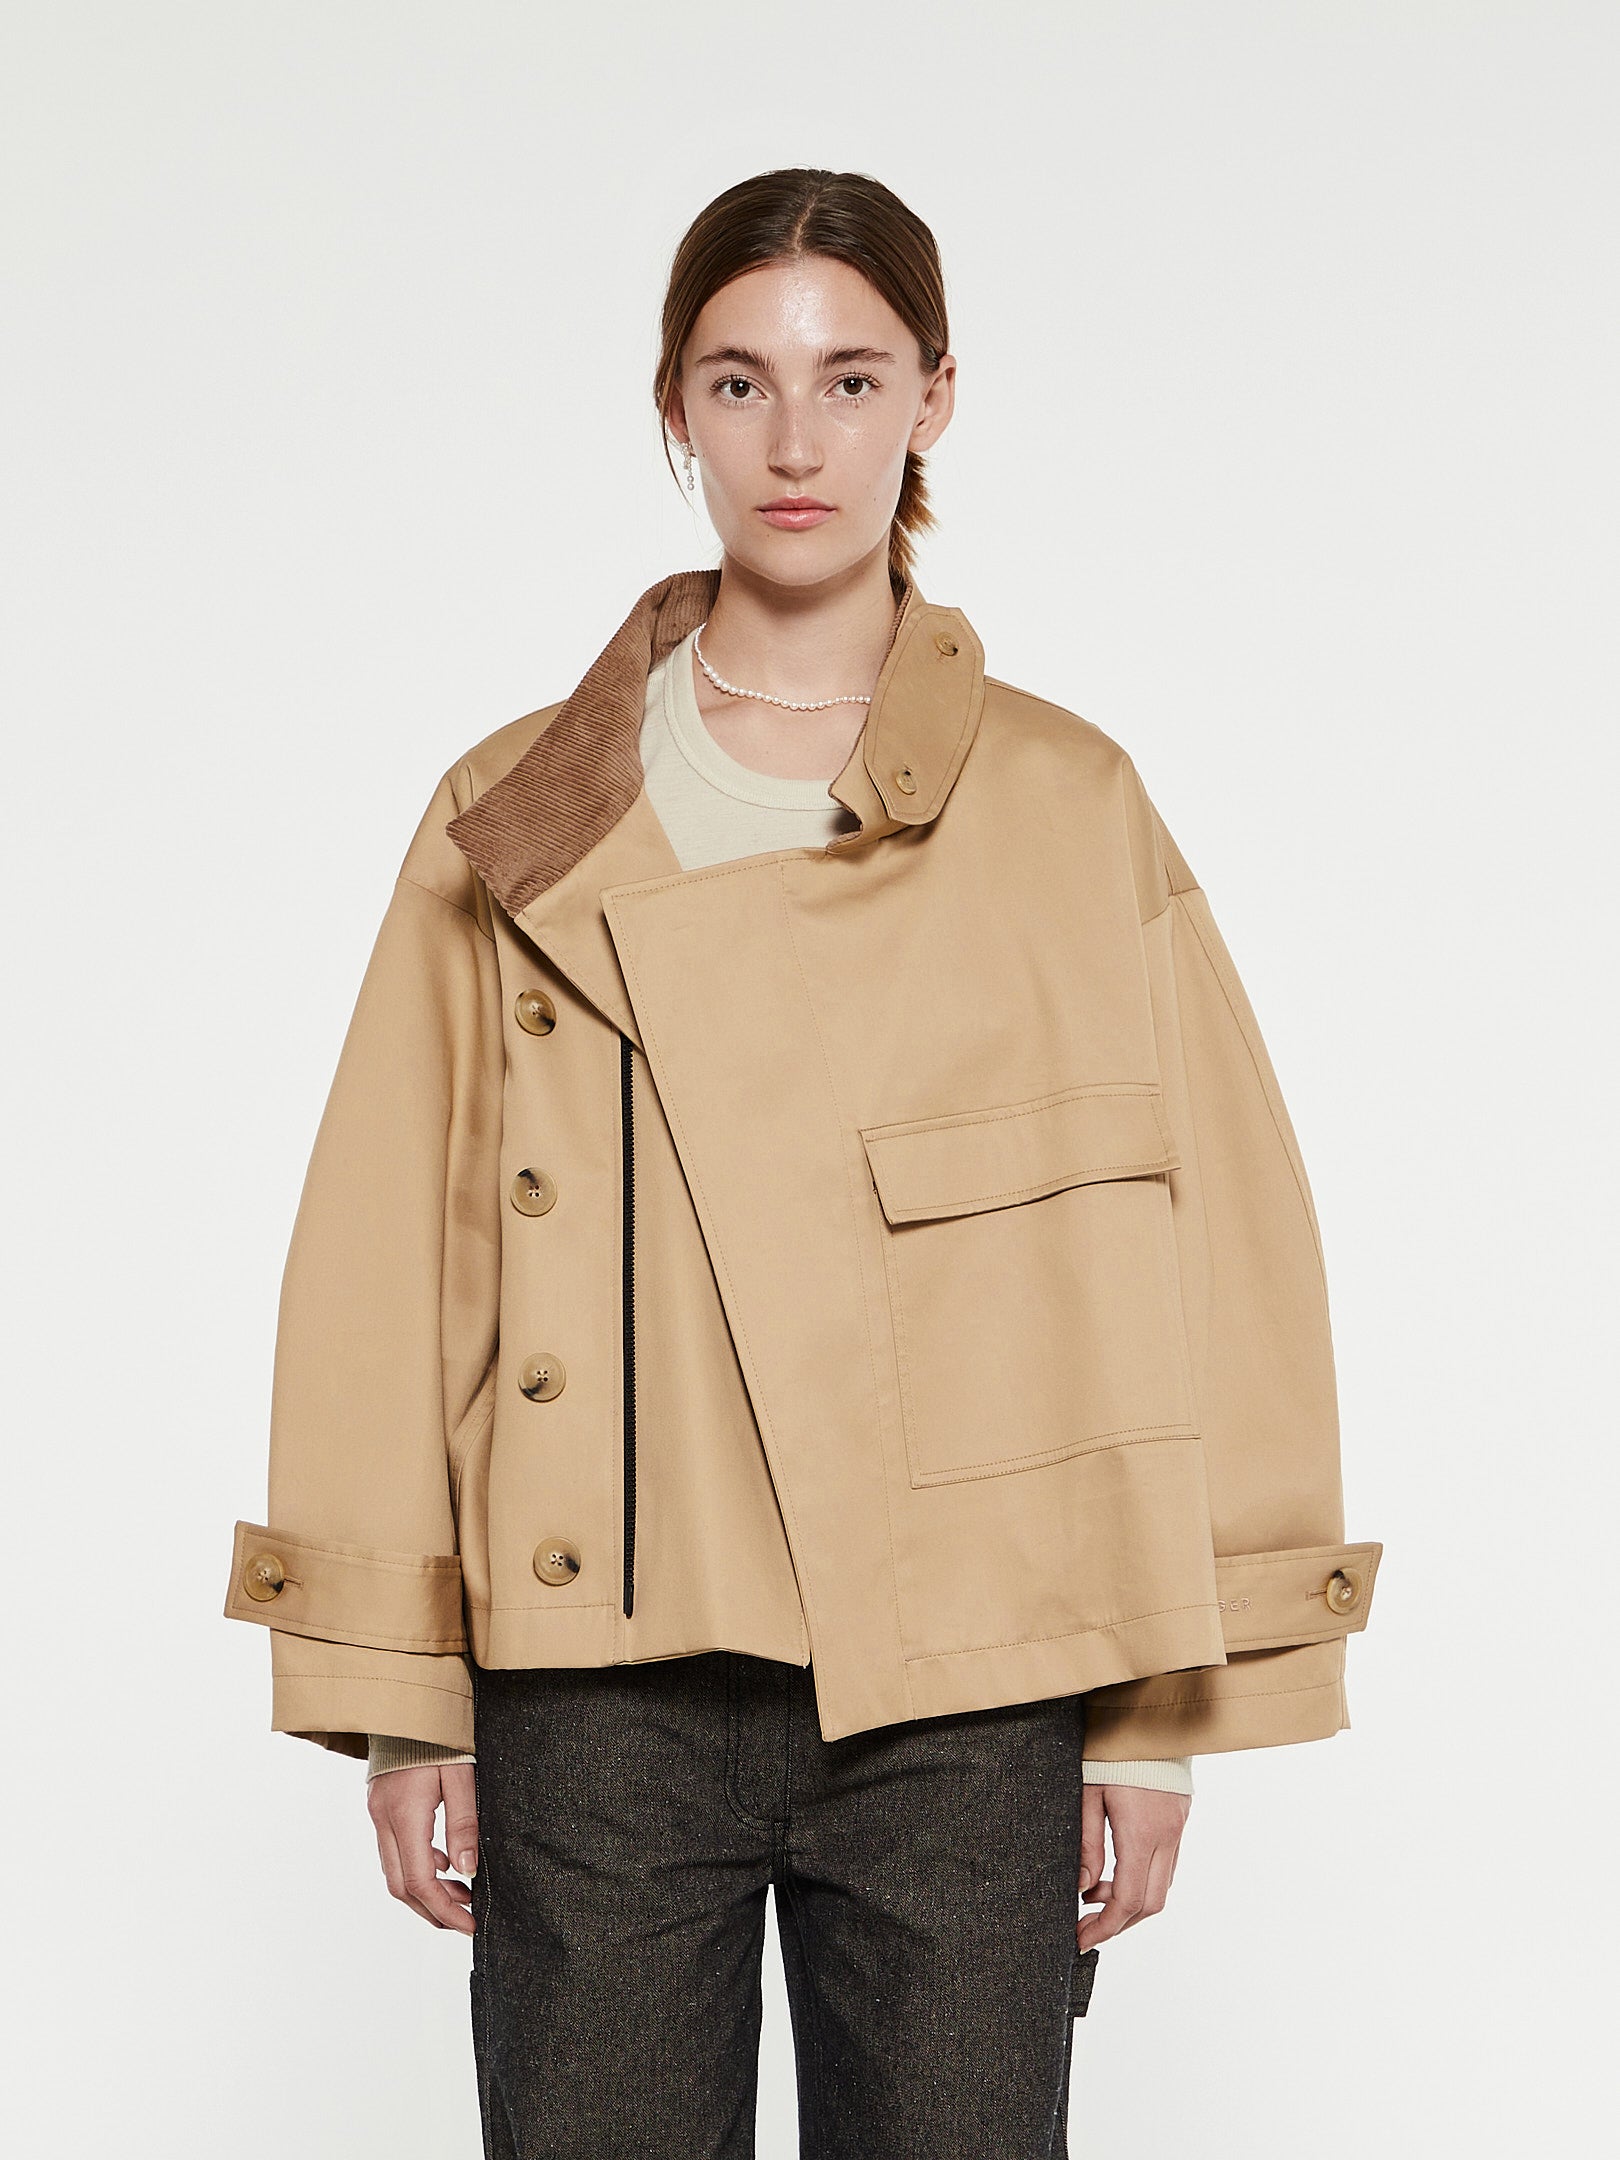 Coats stoy | selection for & at Shop Jackets women the